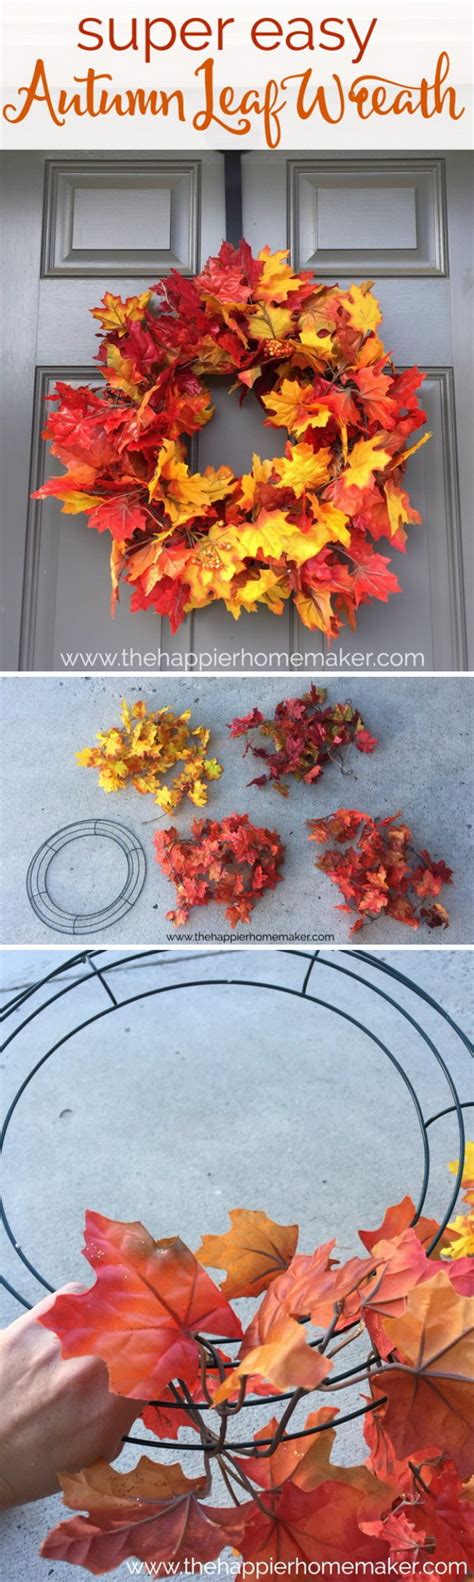 20 Awesome Diy Fall Door Decorations Hative